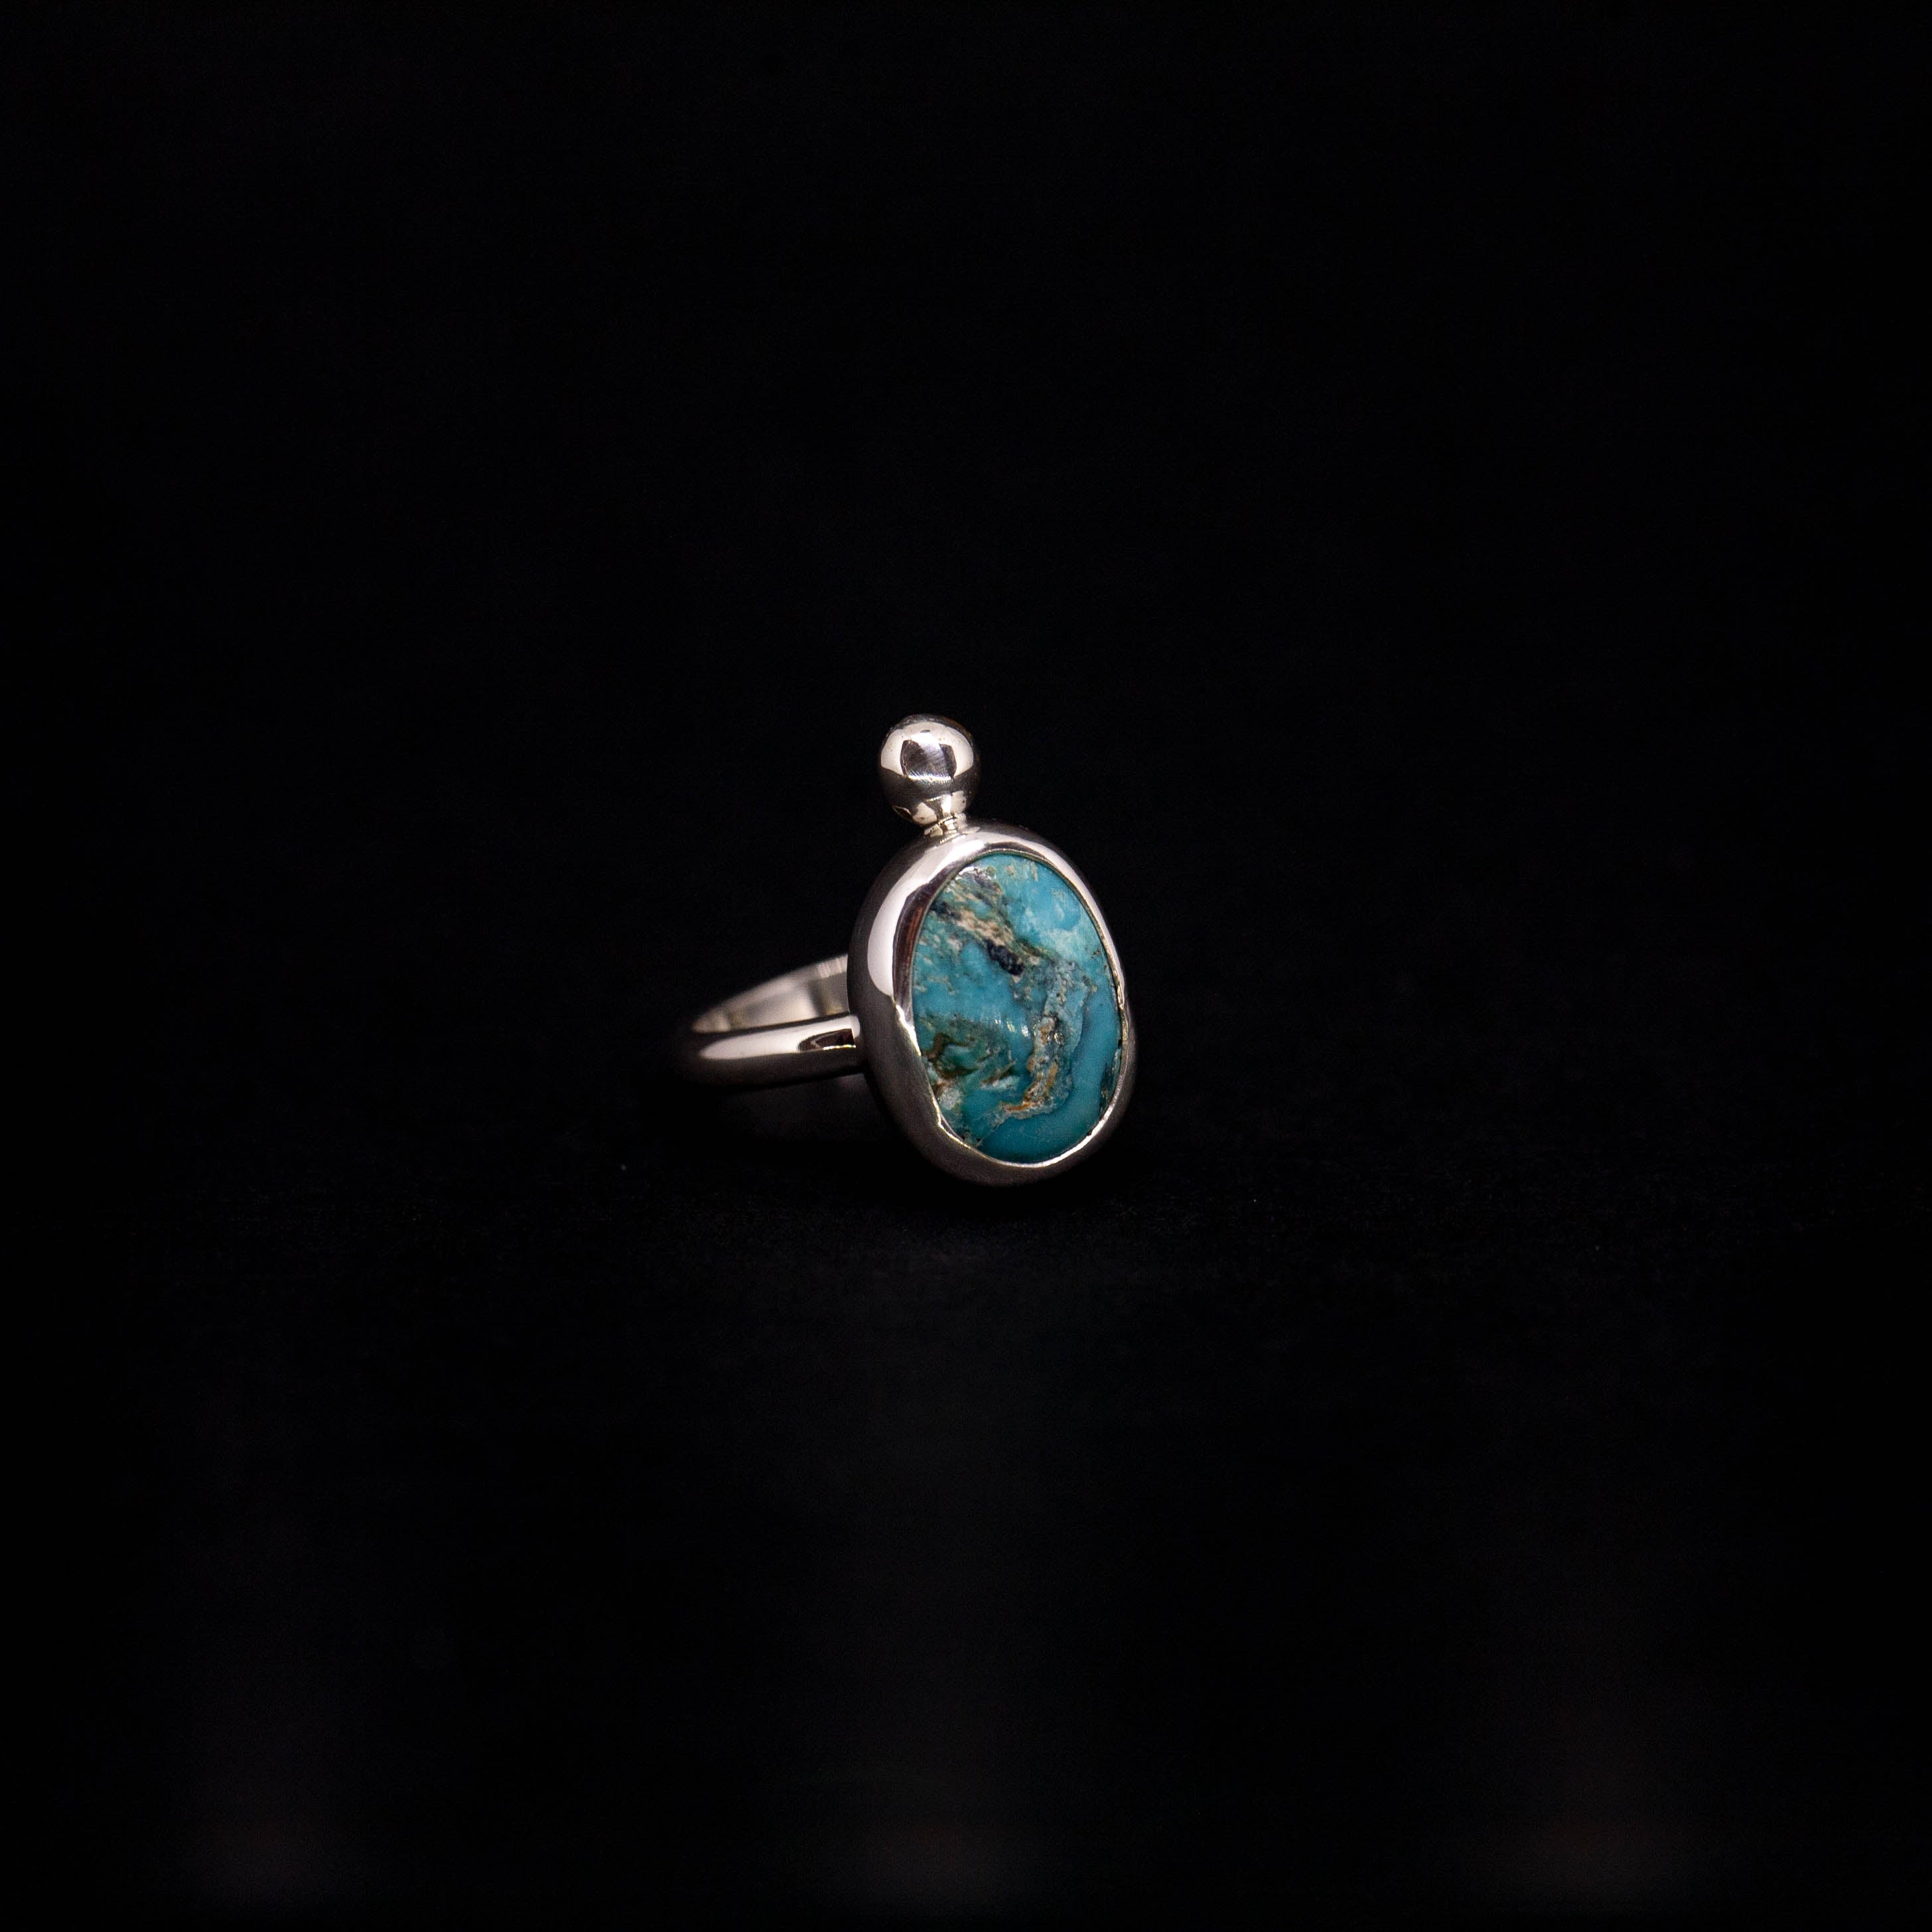 BAGUE TURQUOISE TAILLE 4 3/4